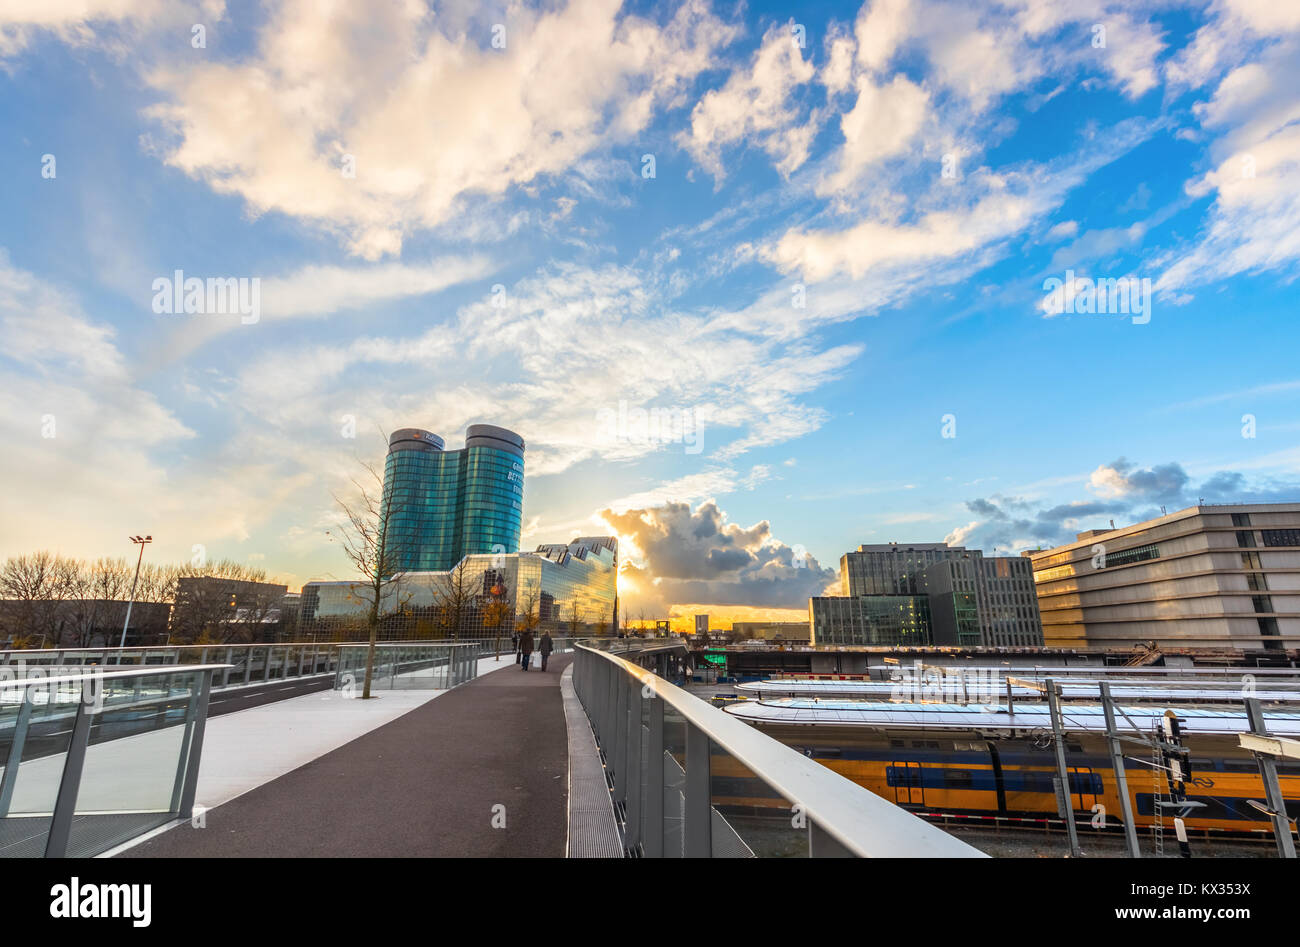 Rabobank headquarters building, the Jaarbeurs building and Utrecht Centraal Station viewed from the Moreelsebrug during sunset. The Netherlands. Stock Photo